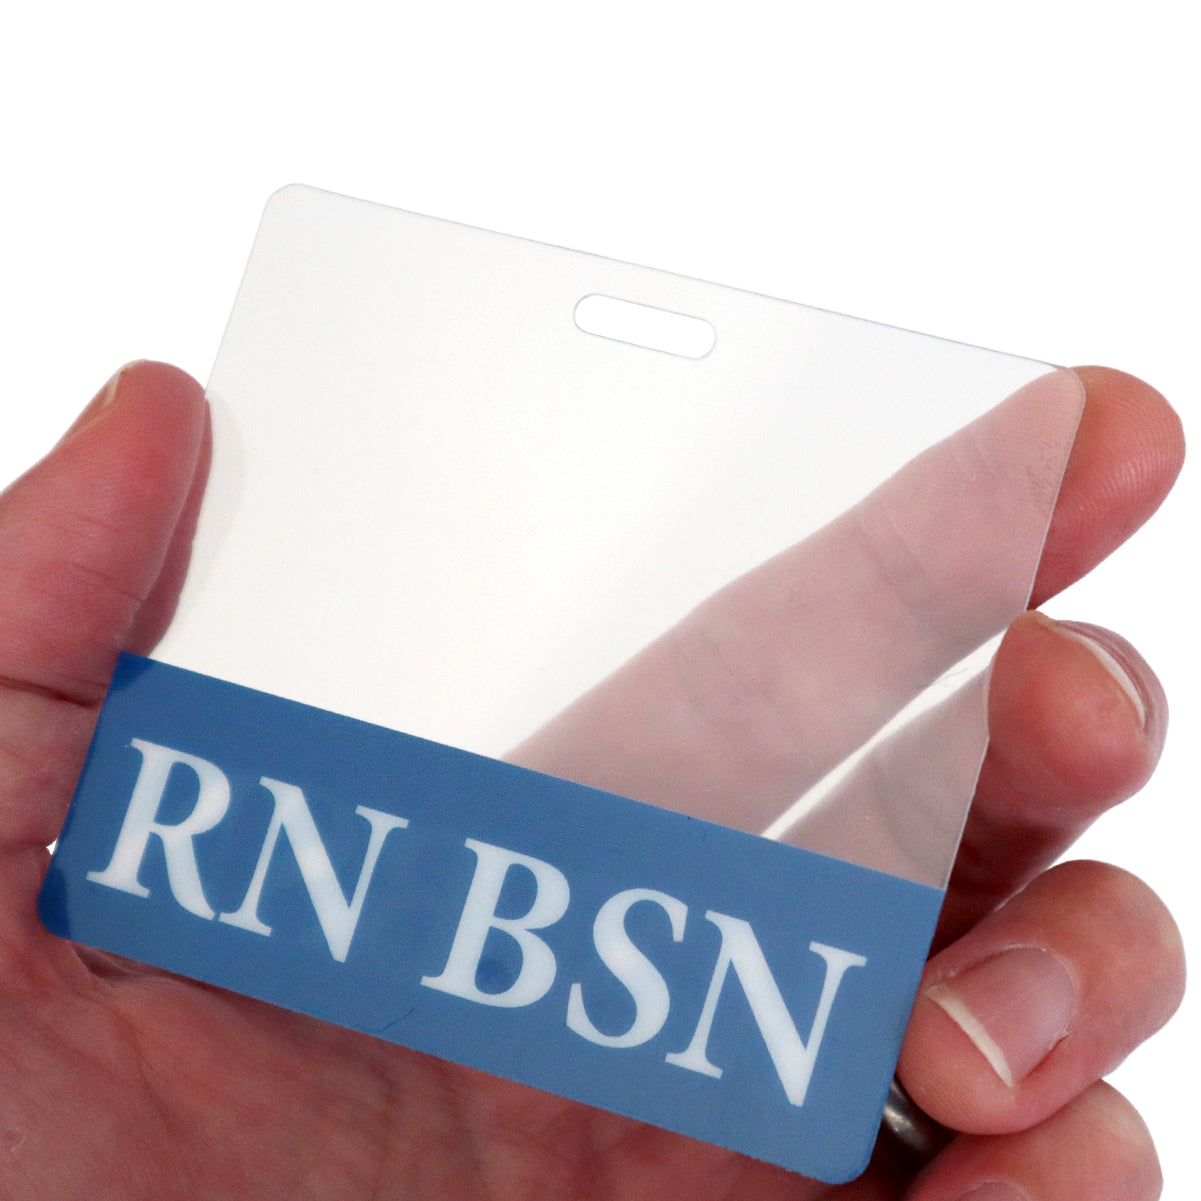 A hand holding a Clear RN BSN Badge Buddy - Horizontal Nurse ID Badge Backer - Double Sided Print with a blue strip at the bottom displaying the text "RN BSN" in white letters.